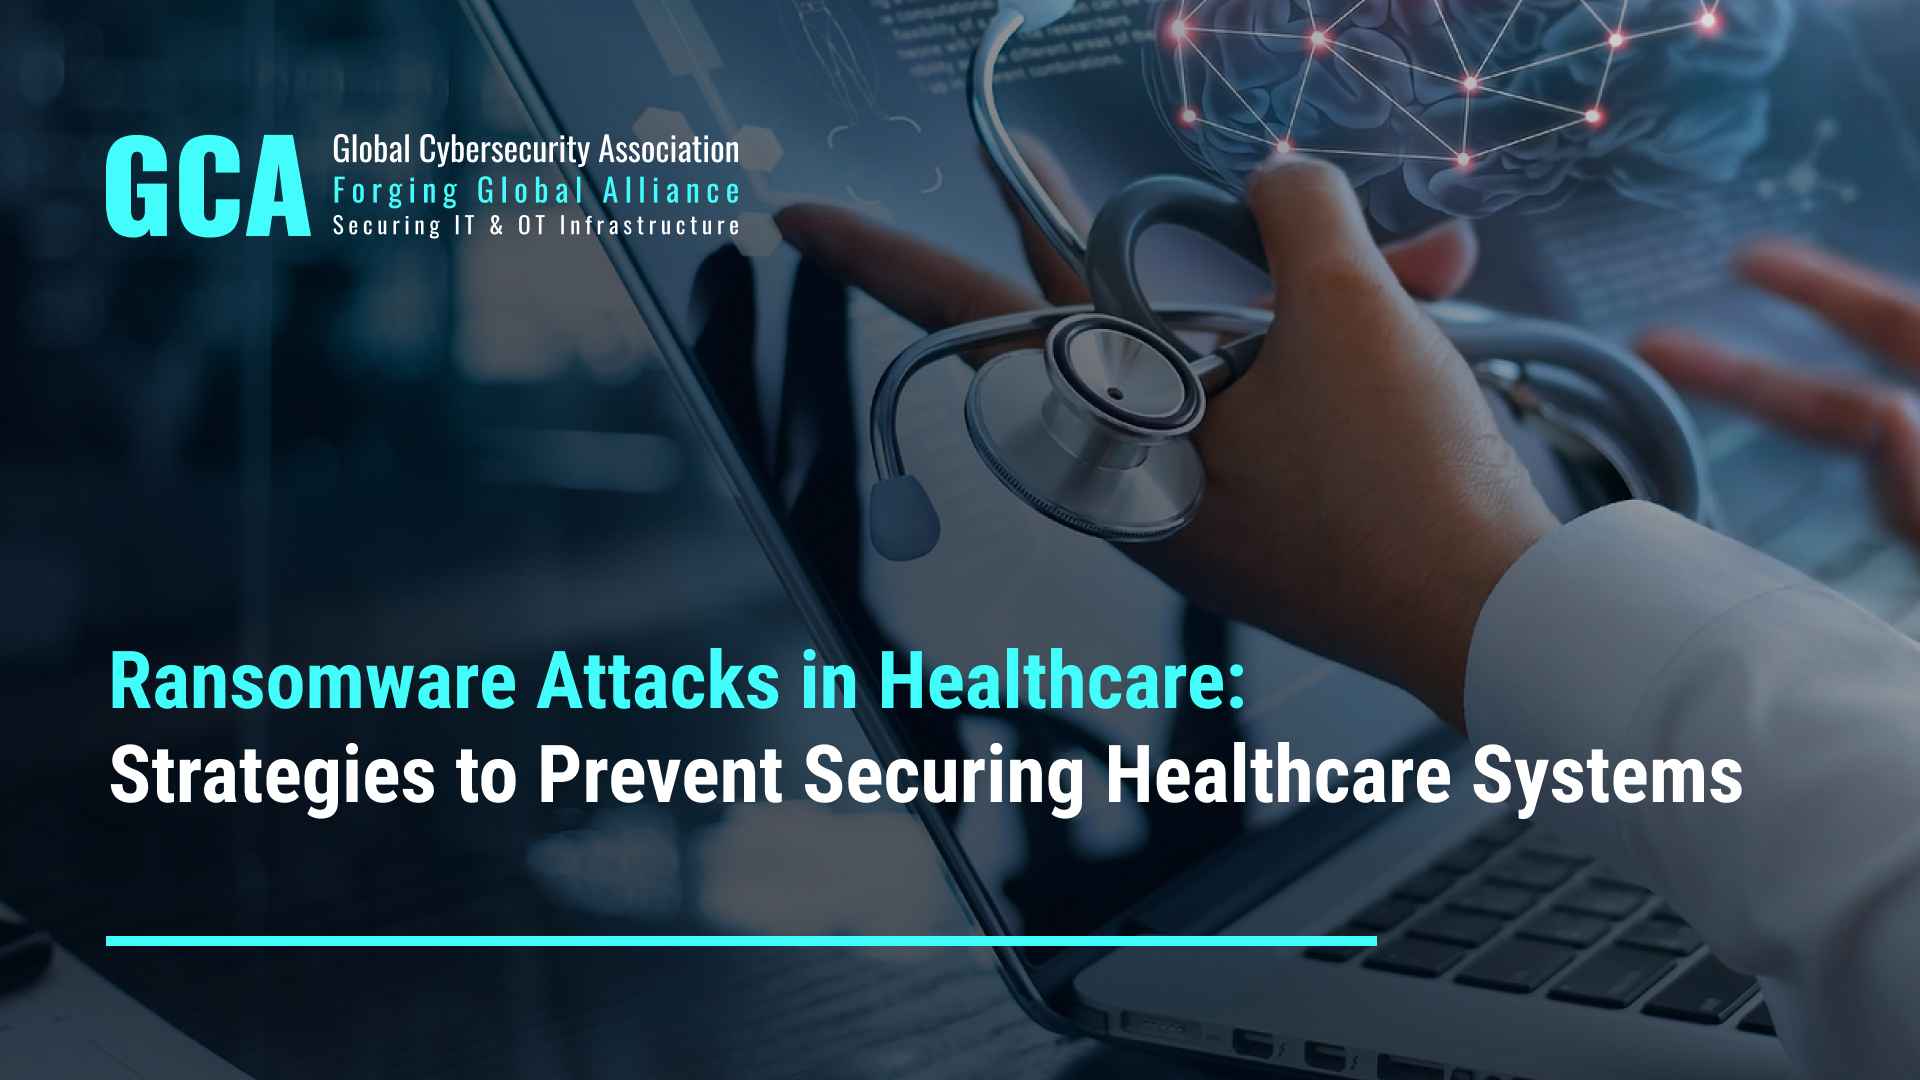 Ransomware Attacks in Healthcare: Strategies to Prevent Securing Healthcare Systems